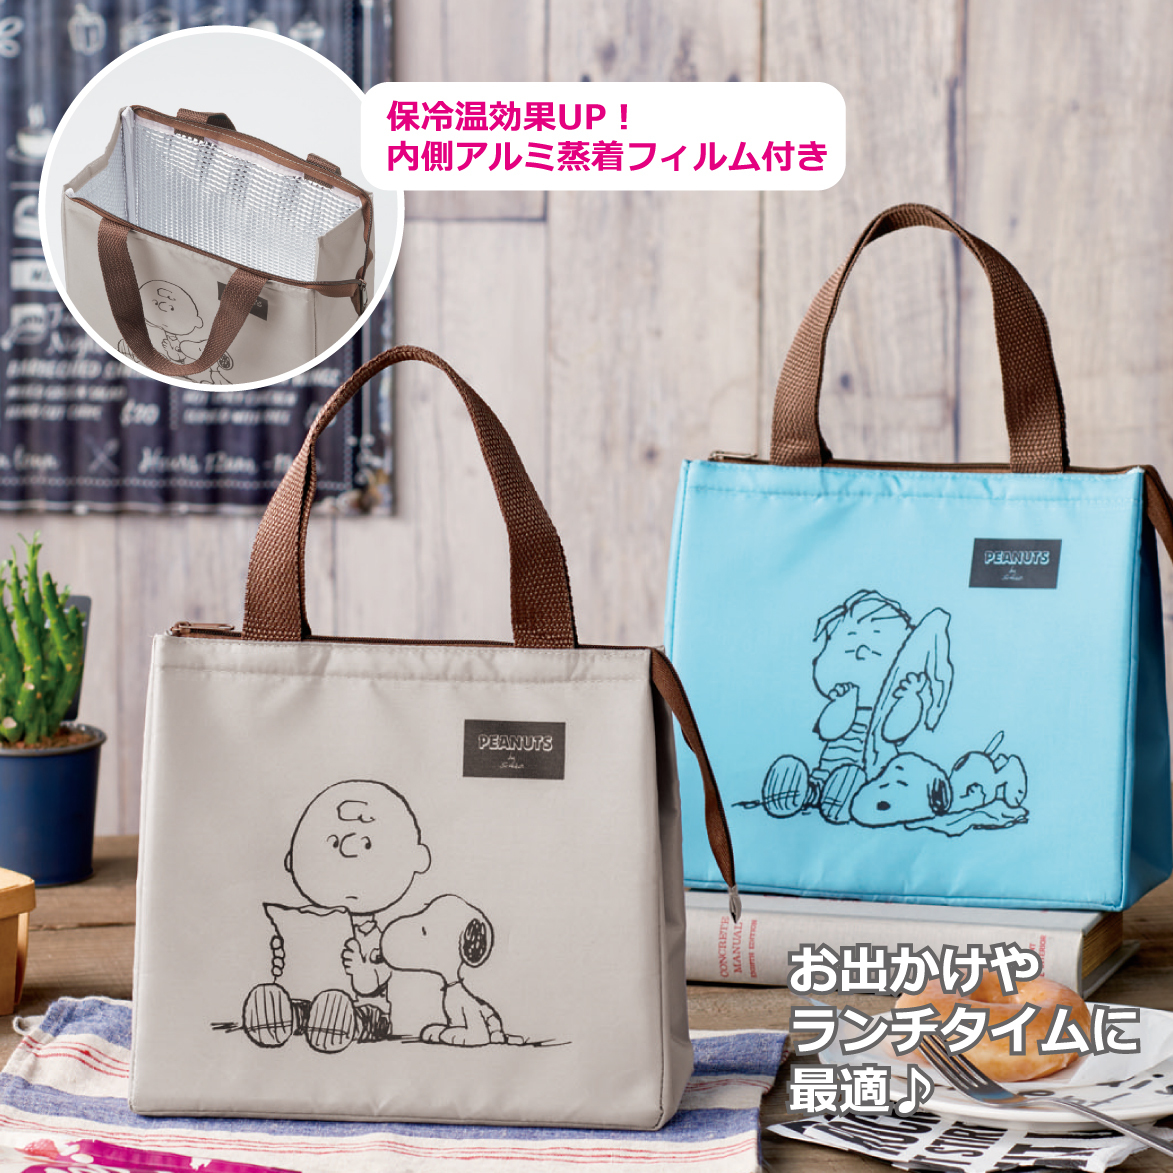  Snoopy lunch bag square keep cool heat insulation lady's high capacity stylish . lunch box fastener attaching eko-bag light weight lovely reply 